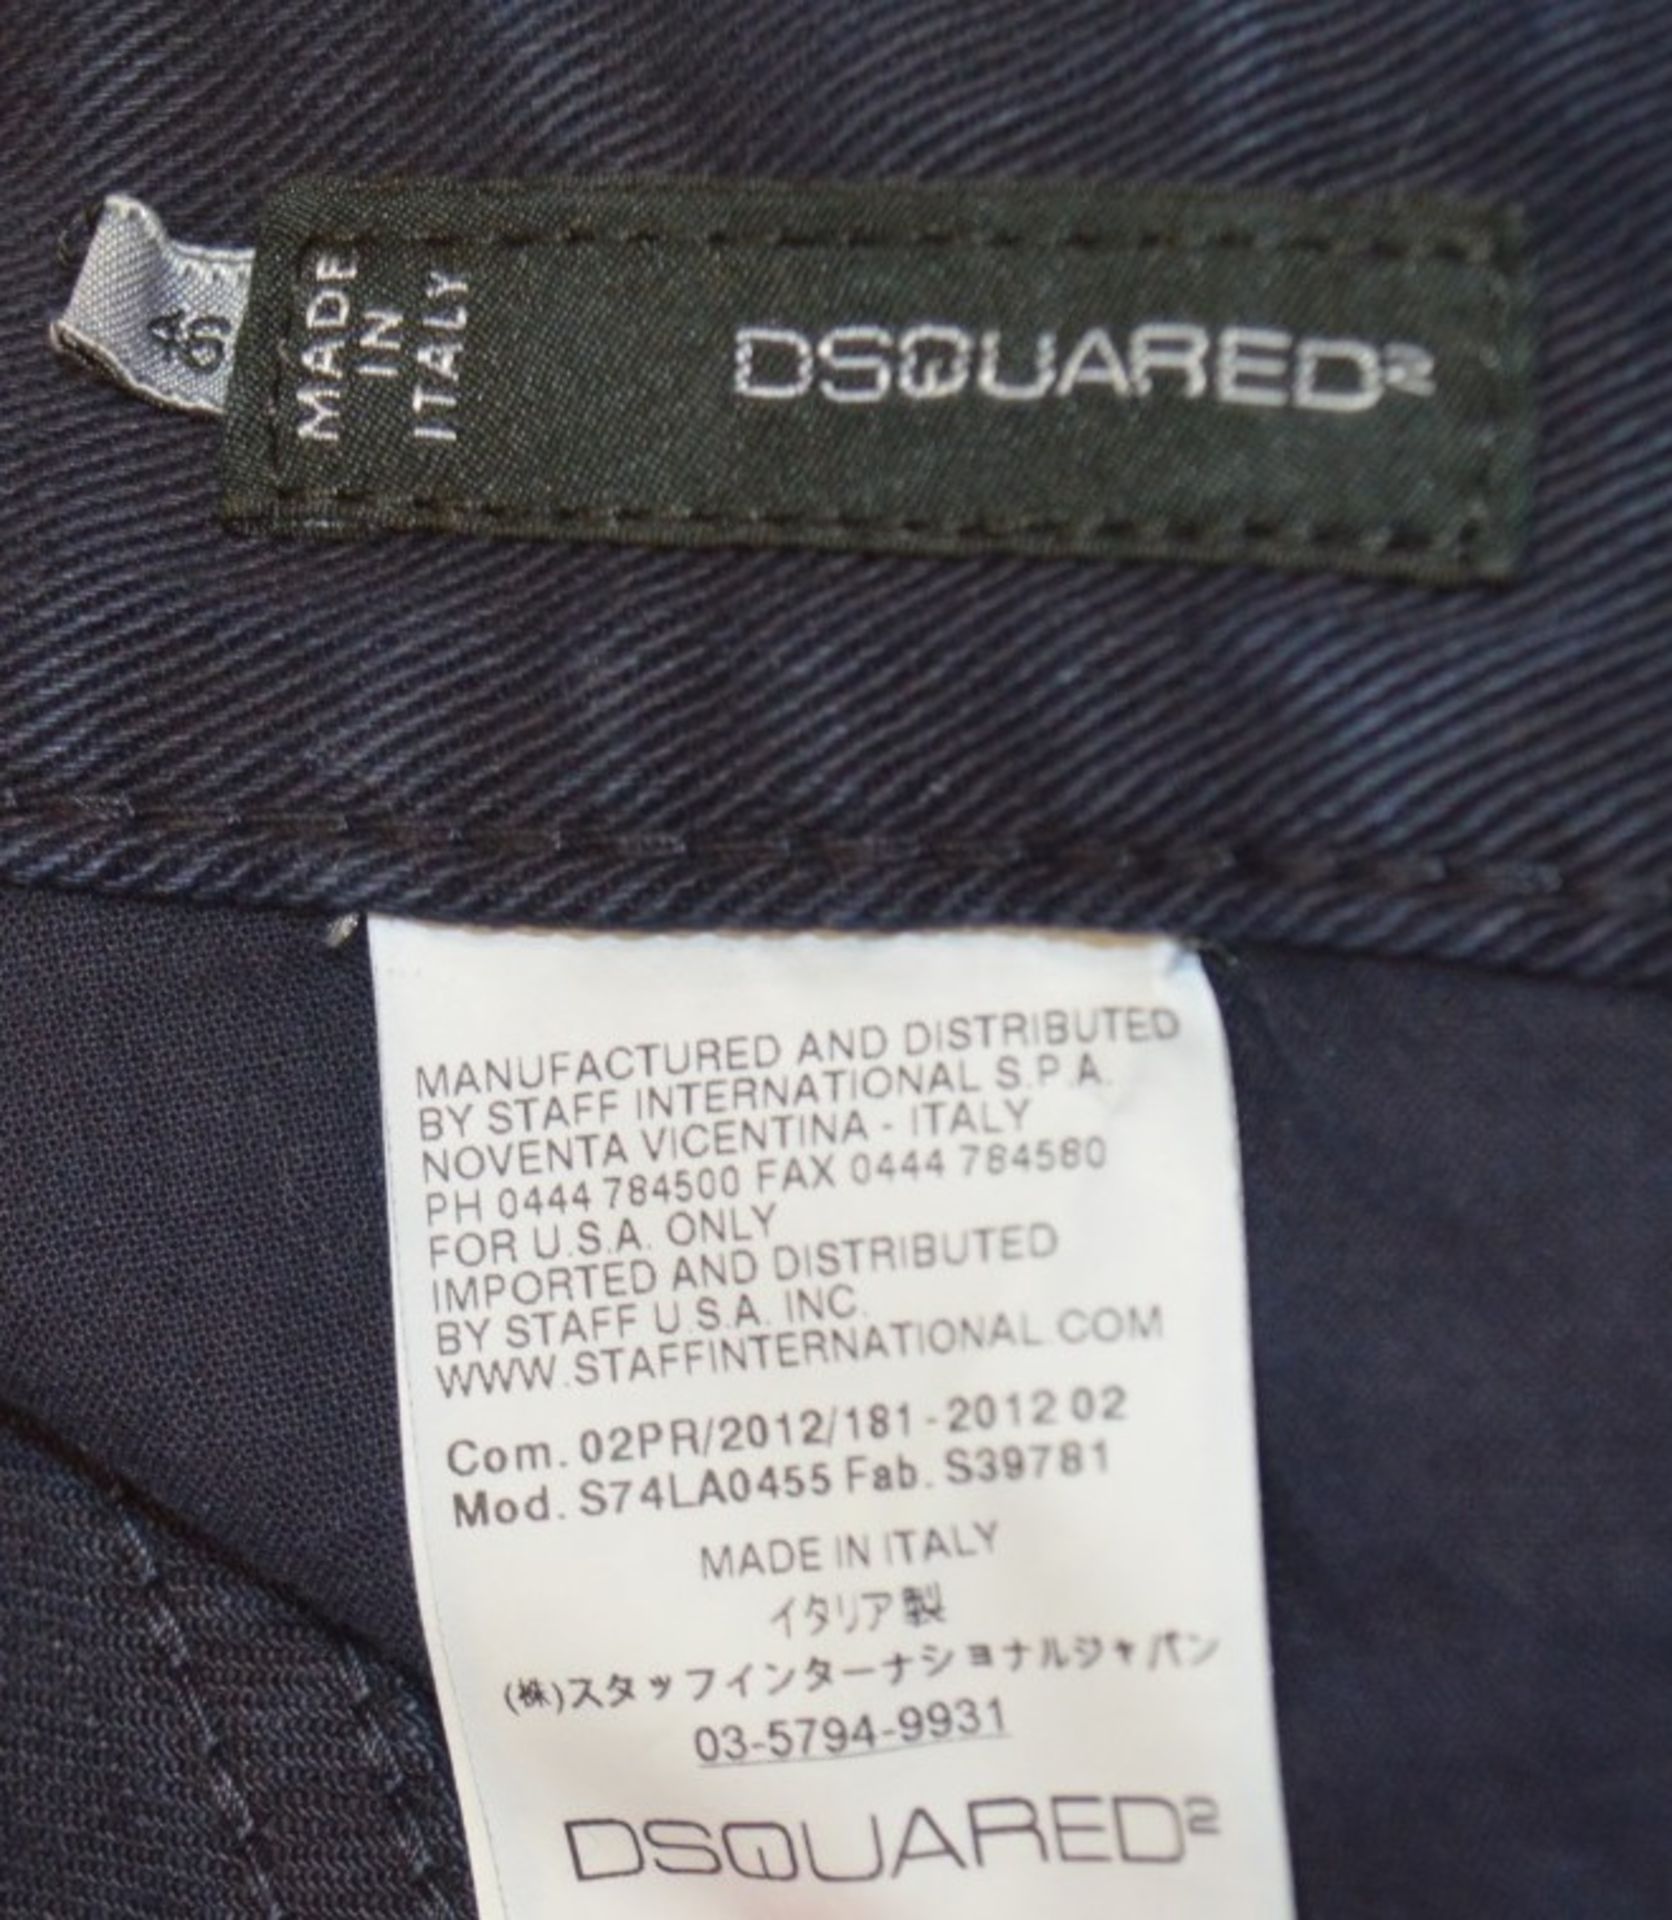 1 x Pair Of Men's Genuine Dsquared2 Designer Jeans In Navy - Waist Size: UK 30 / ITALY 46 - Preowned - Image 5 of 6